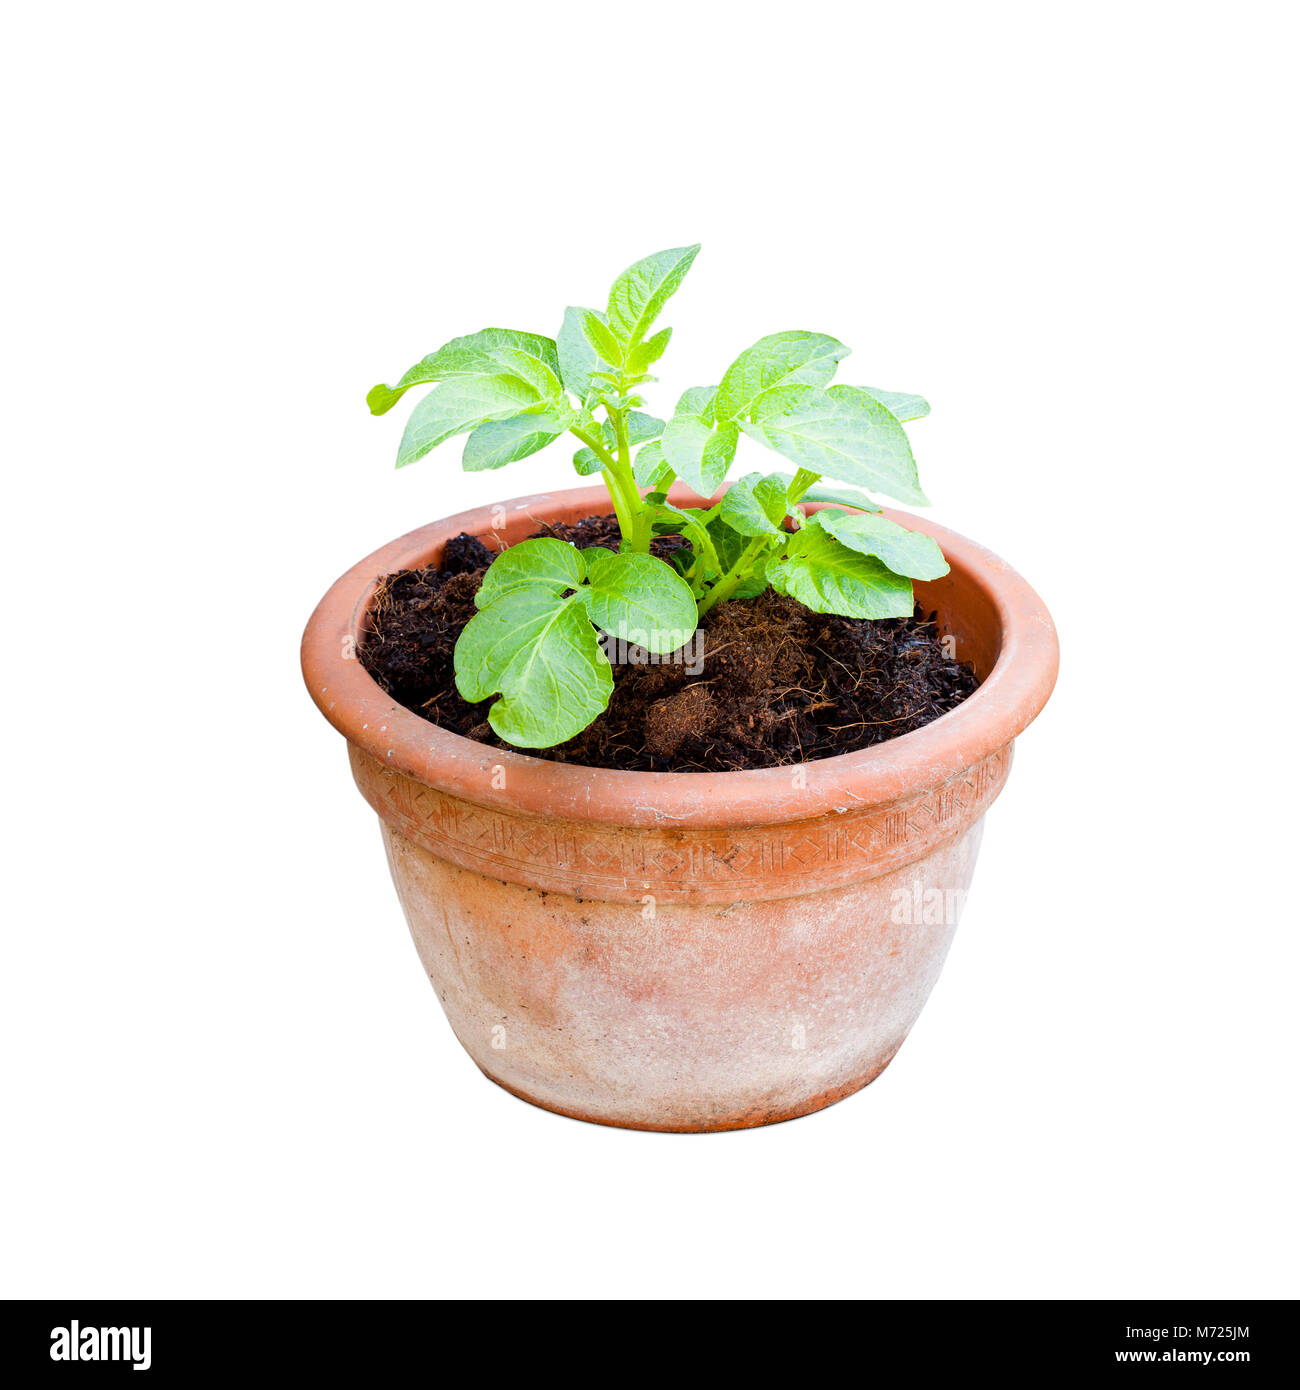 Potatoes  growing in plant pots isolated Stock Photo